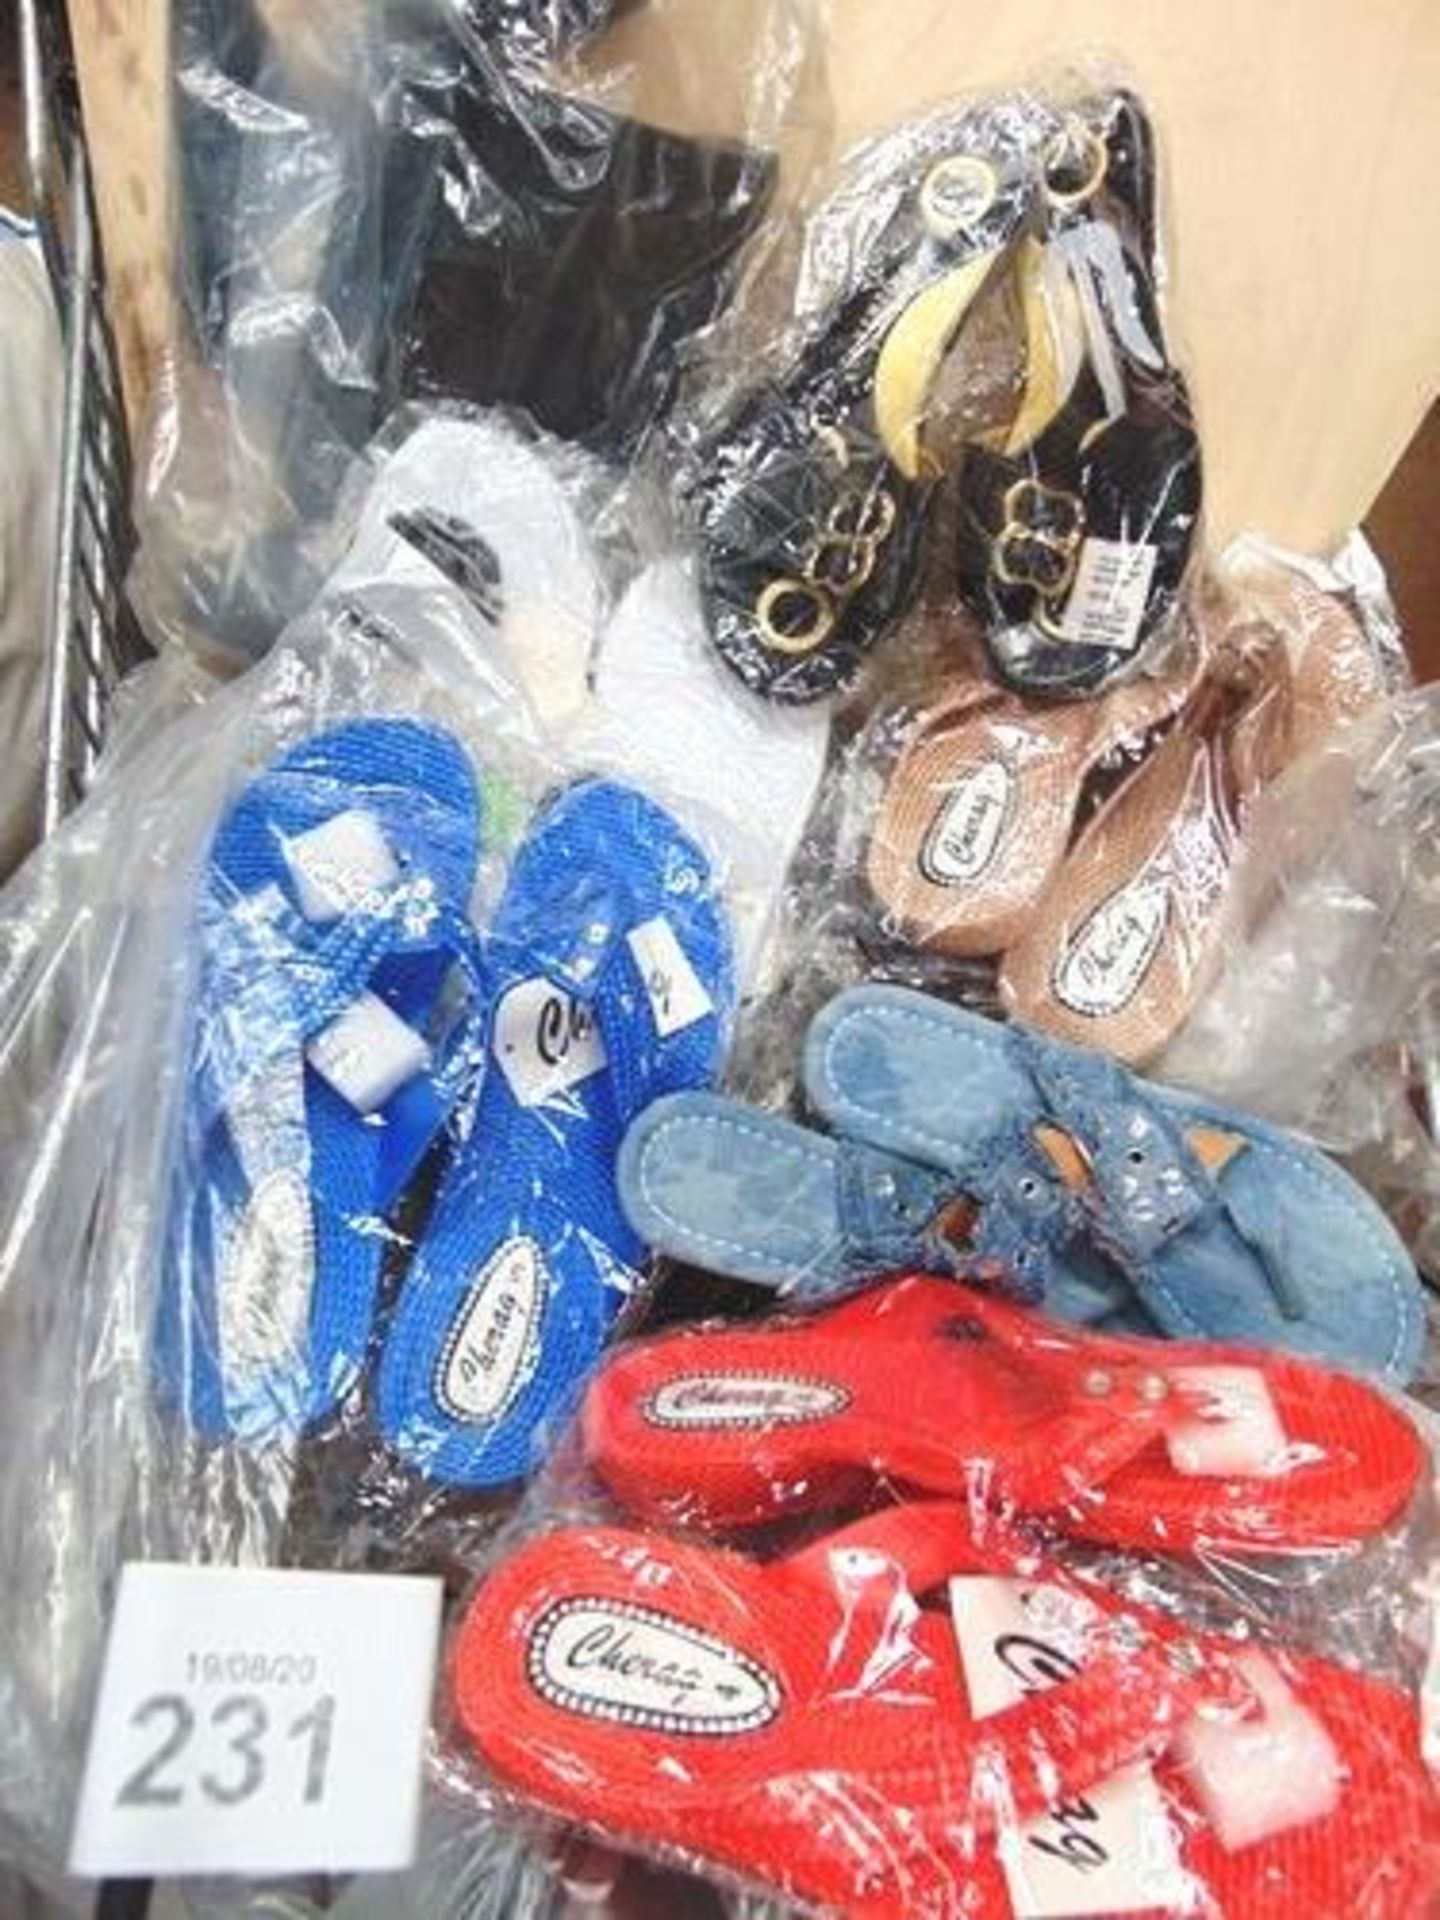 Approximately 20 x pairs of ladies sandals and beach wear including Dunlop and Cherag toe post